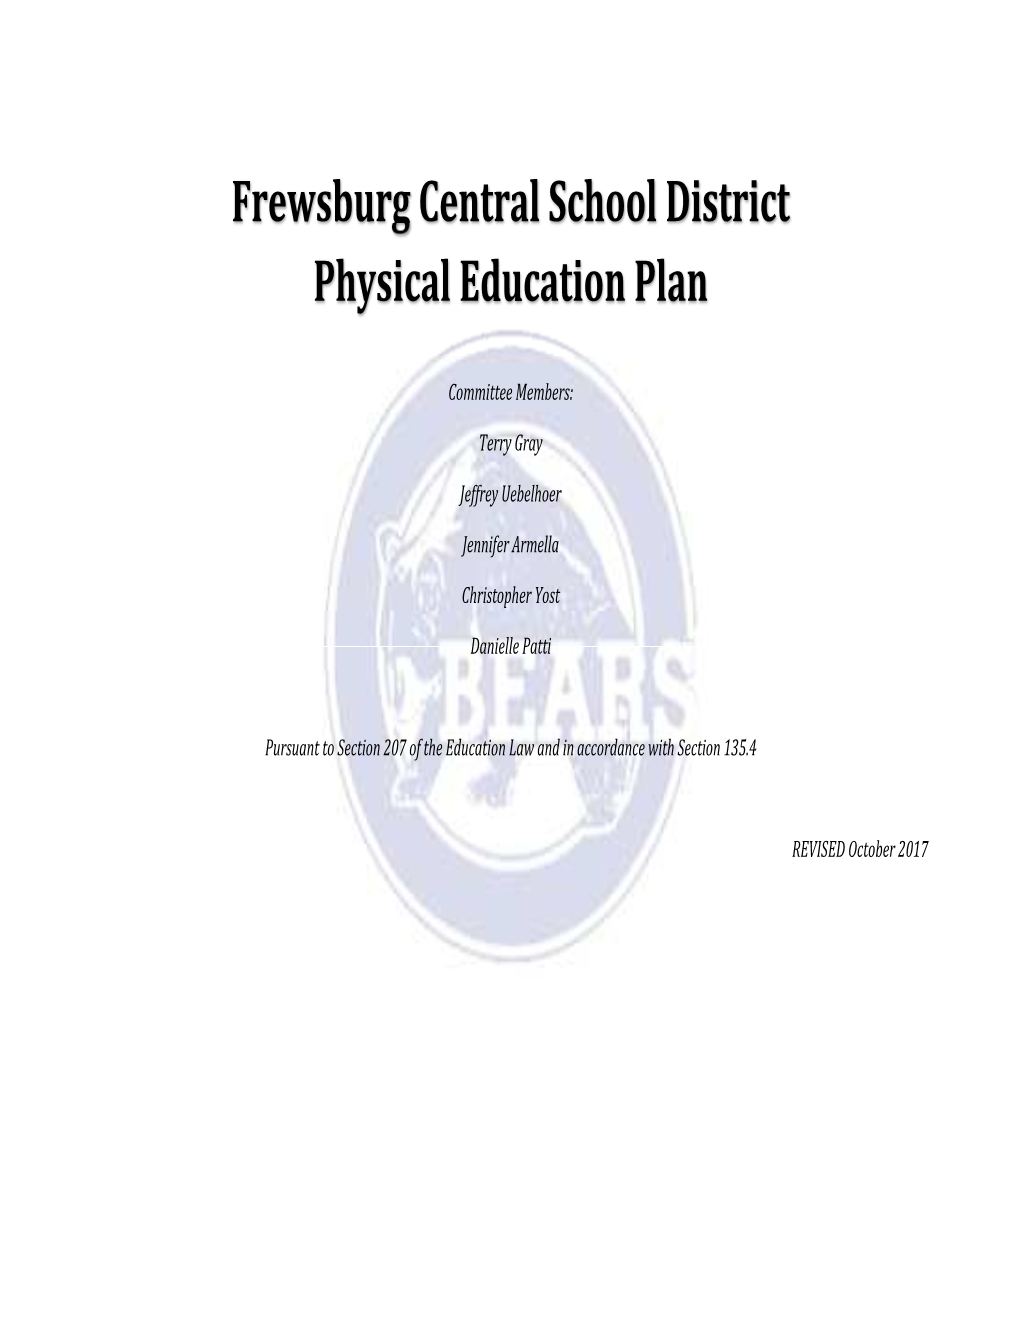 District Physical Education Plan Approved Oct 12 2017